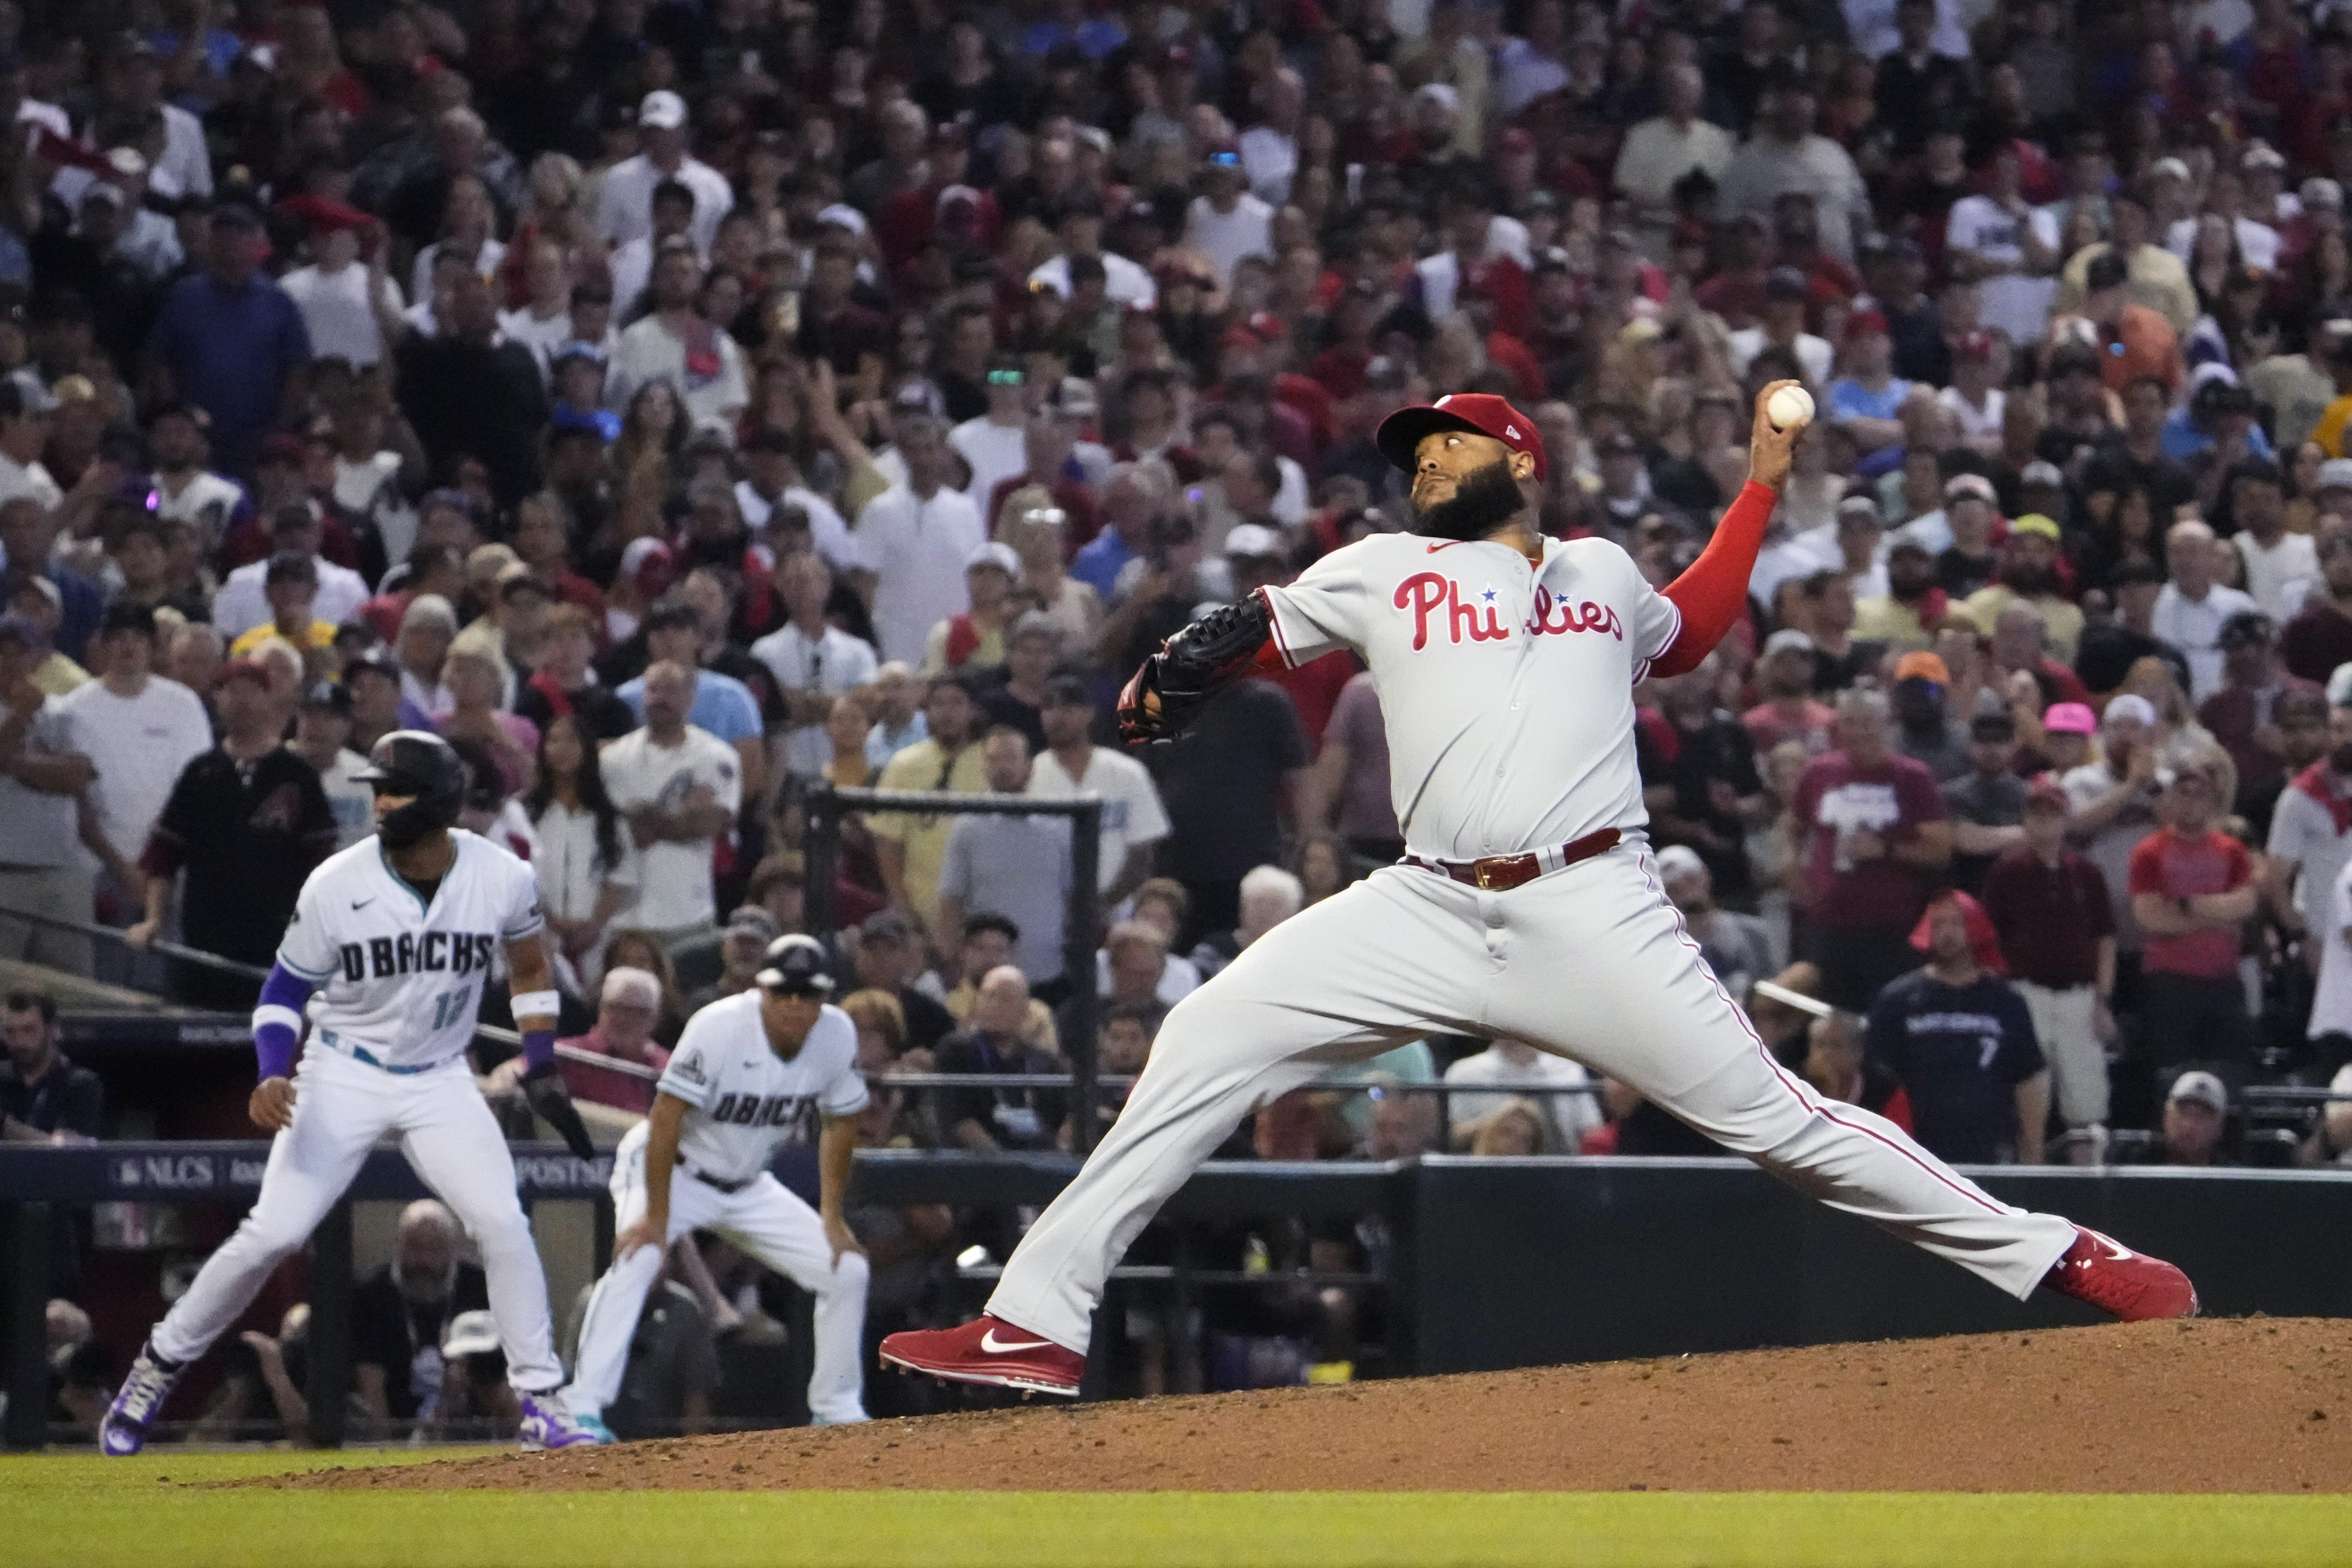 Zack Wheeler, J.T. Realmuto announced as Gold Glove finalists  Phillies  Nation - Your source for Philadelphia Phillies news, opinion, history,  rumors, events, and other fun stuff.